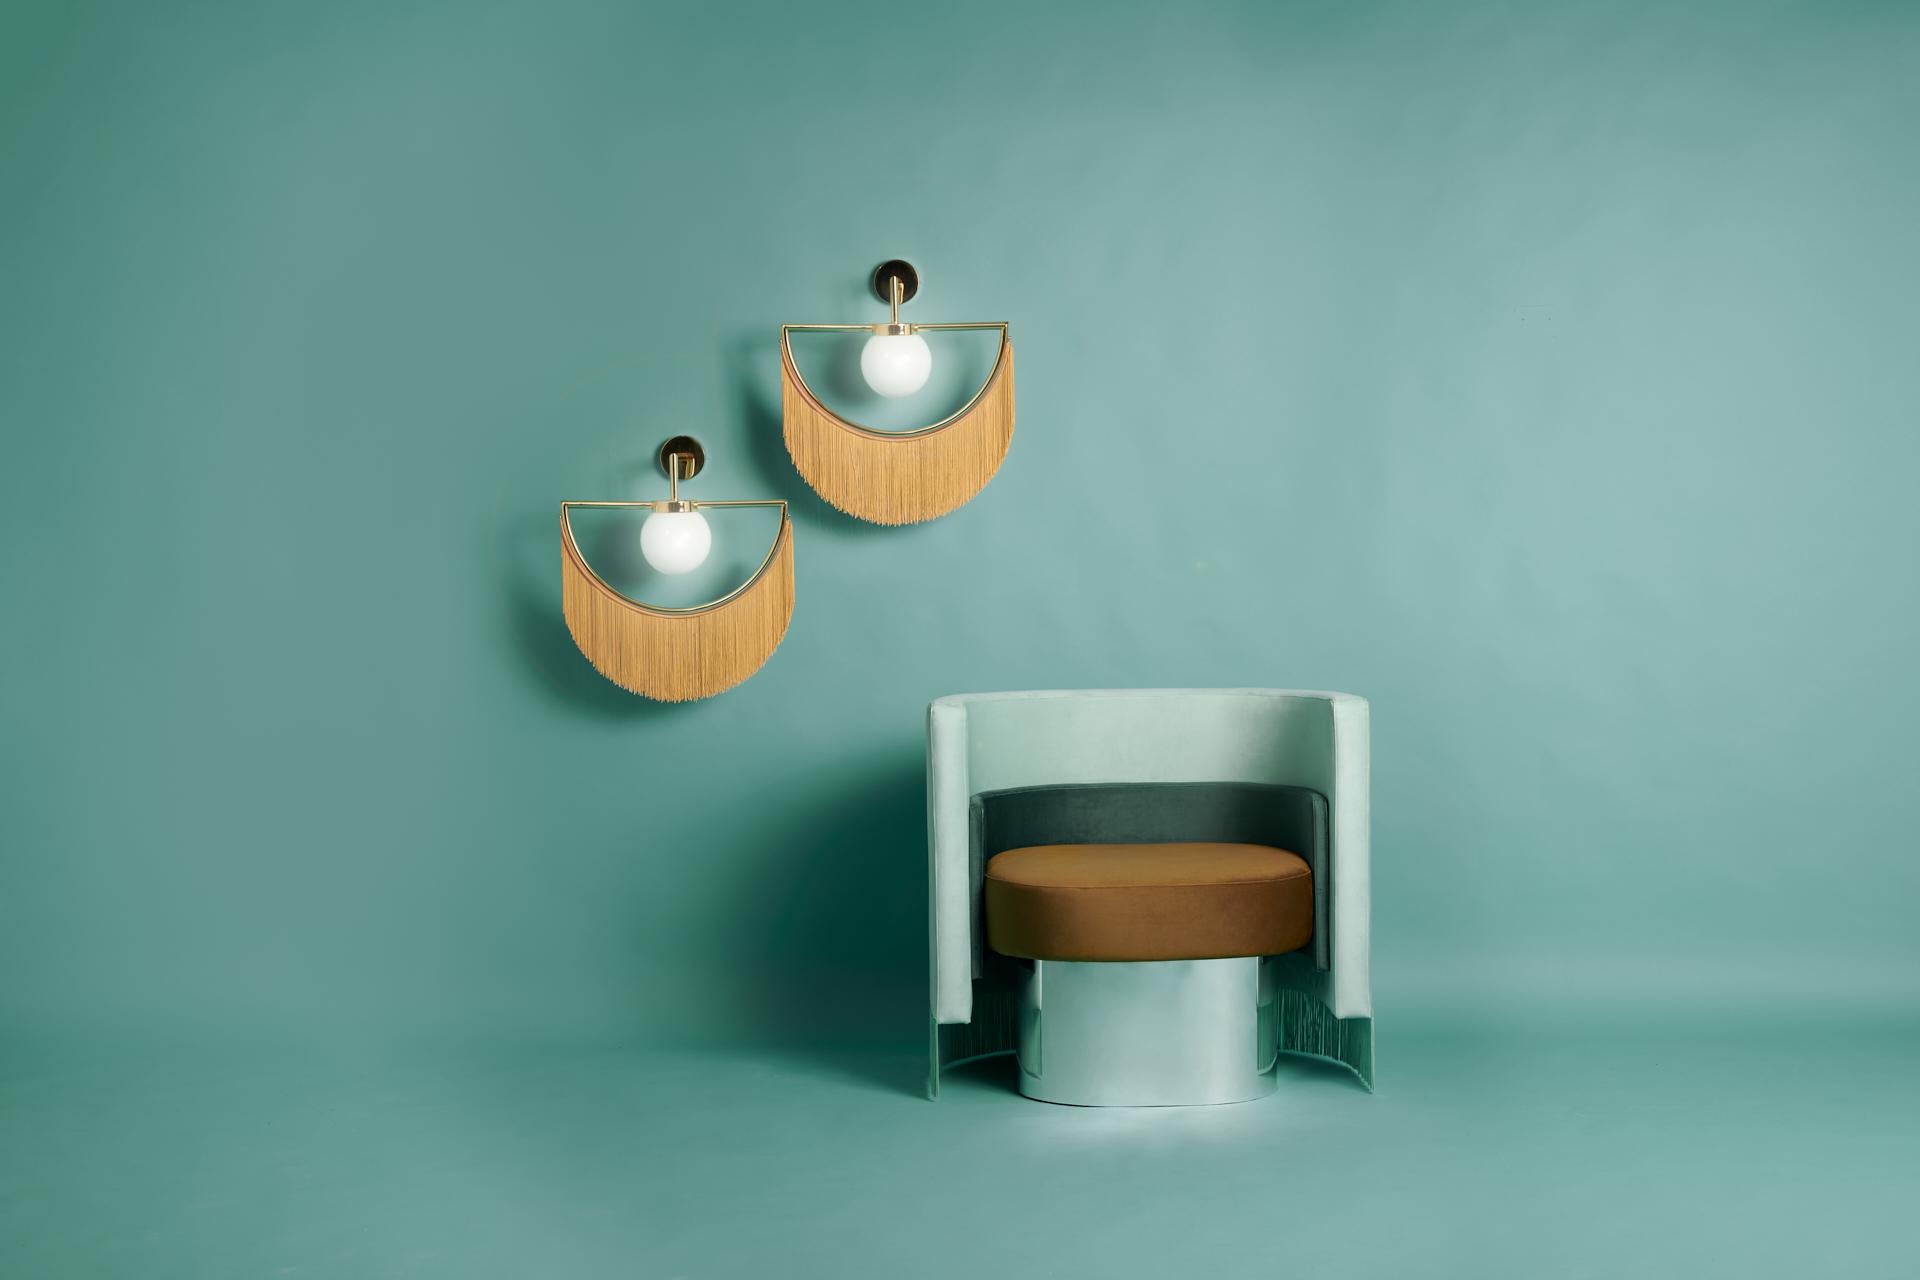 Lamps can wink their eyes, and they can also do it in the most elegant way: with fringes, gold and delicacy. From the collaboration of Masquespacio and Houtique appears Wink, a lamp that brings past and future vibes at the same time.

Wink wall